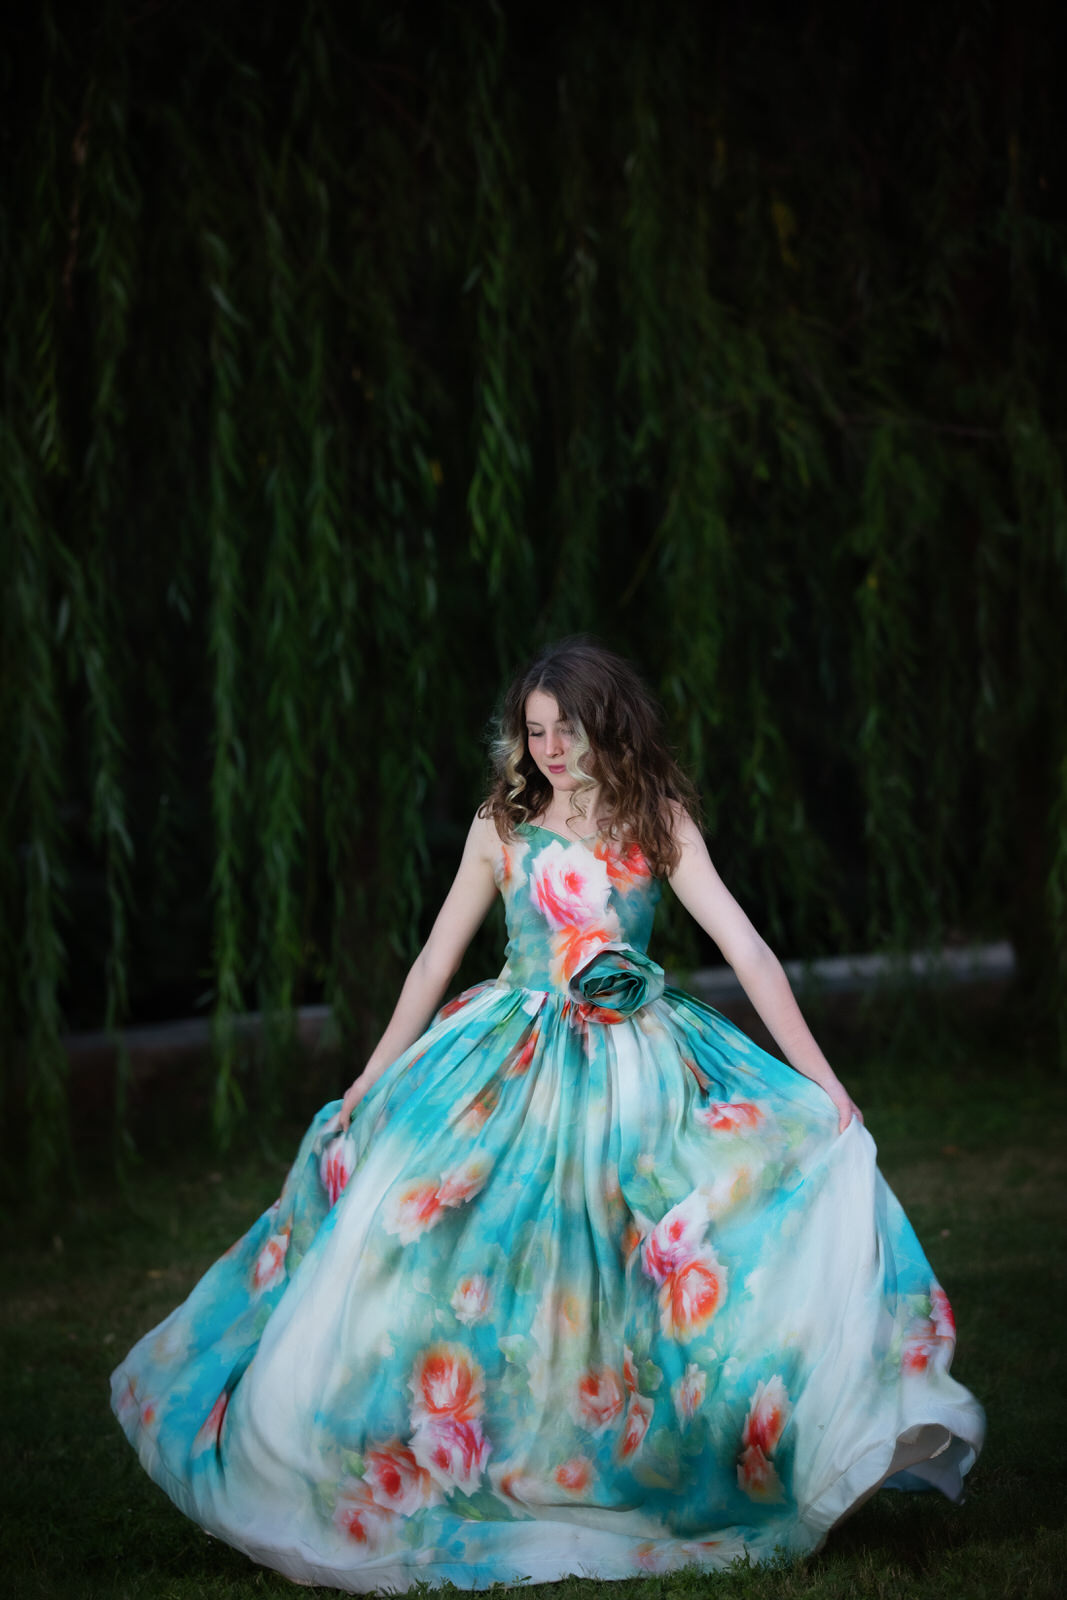 A teenage girl in a floral gown dances under a willow tree fort worth pediatricians